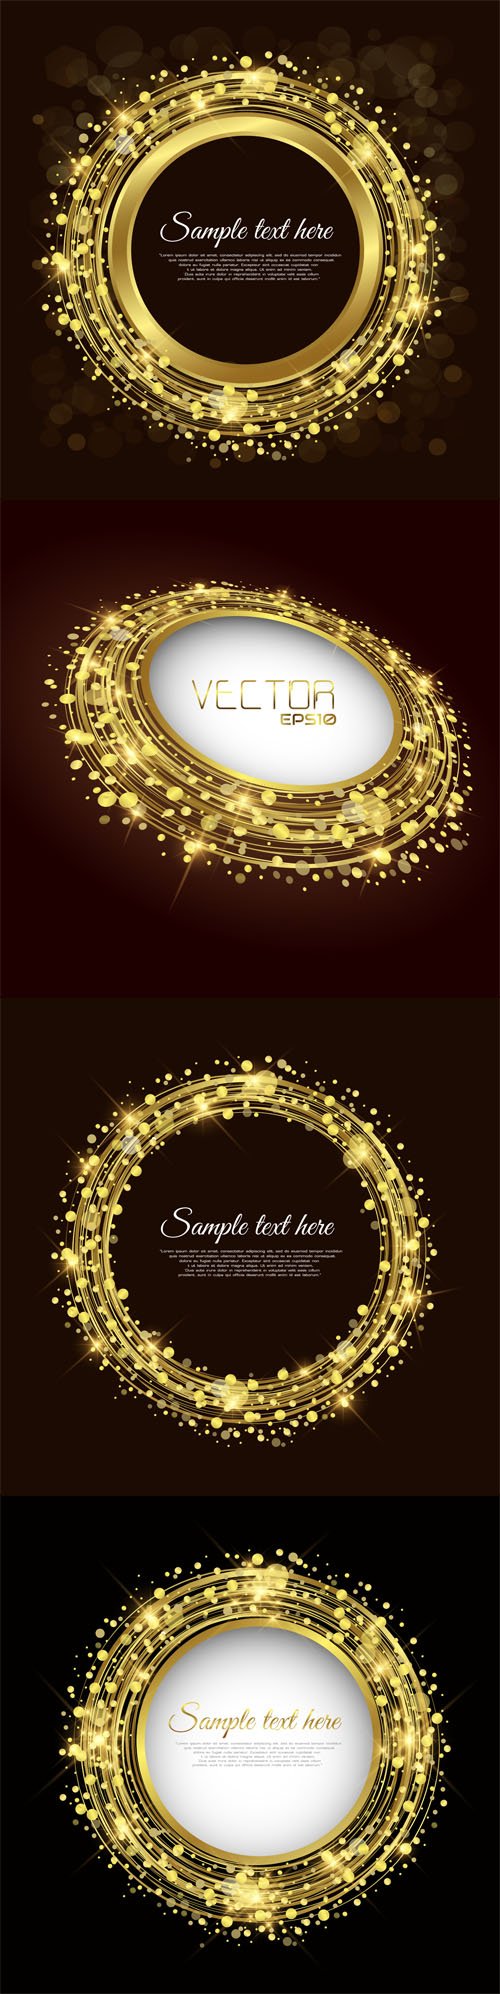 Gold Round Frames - Vector Clipart